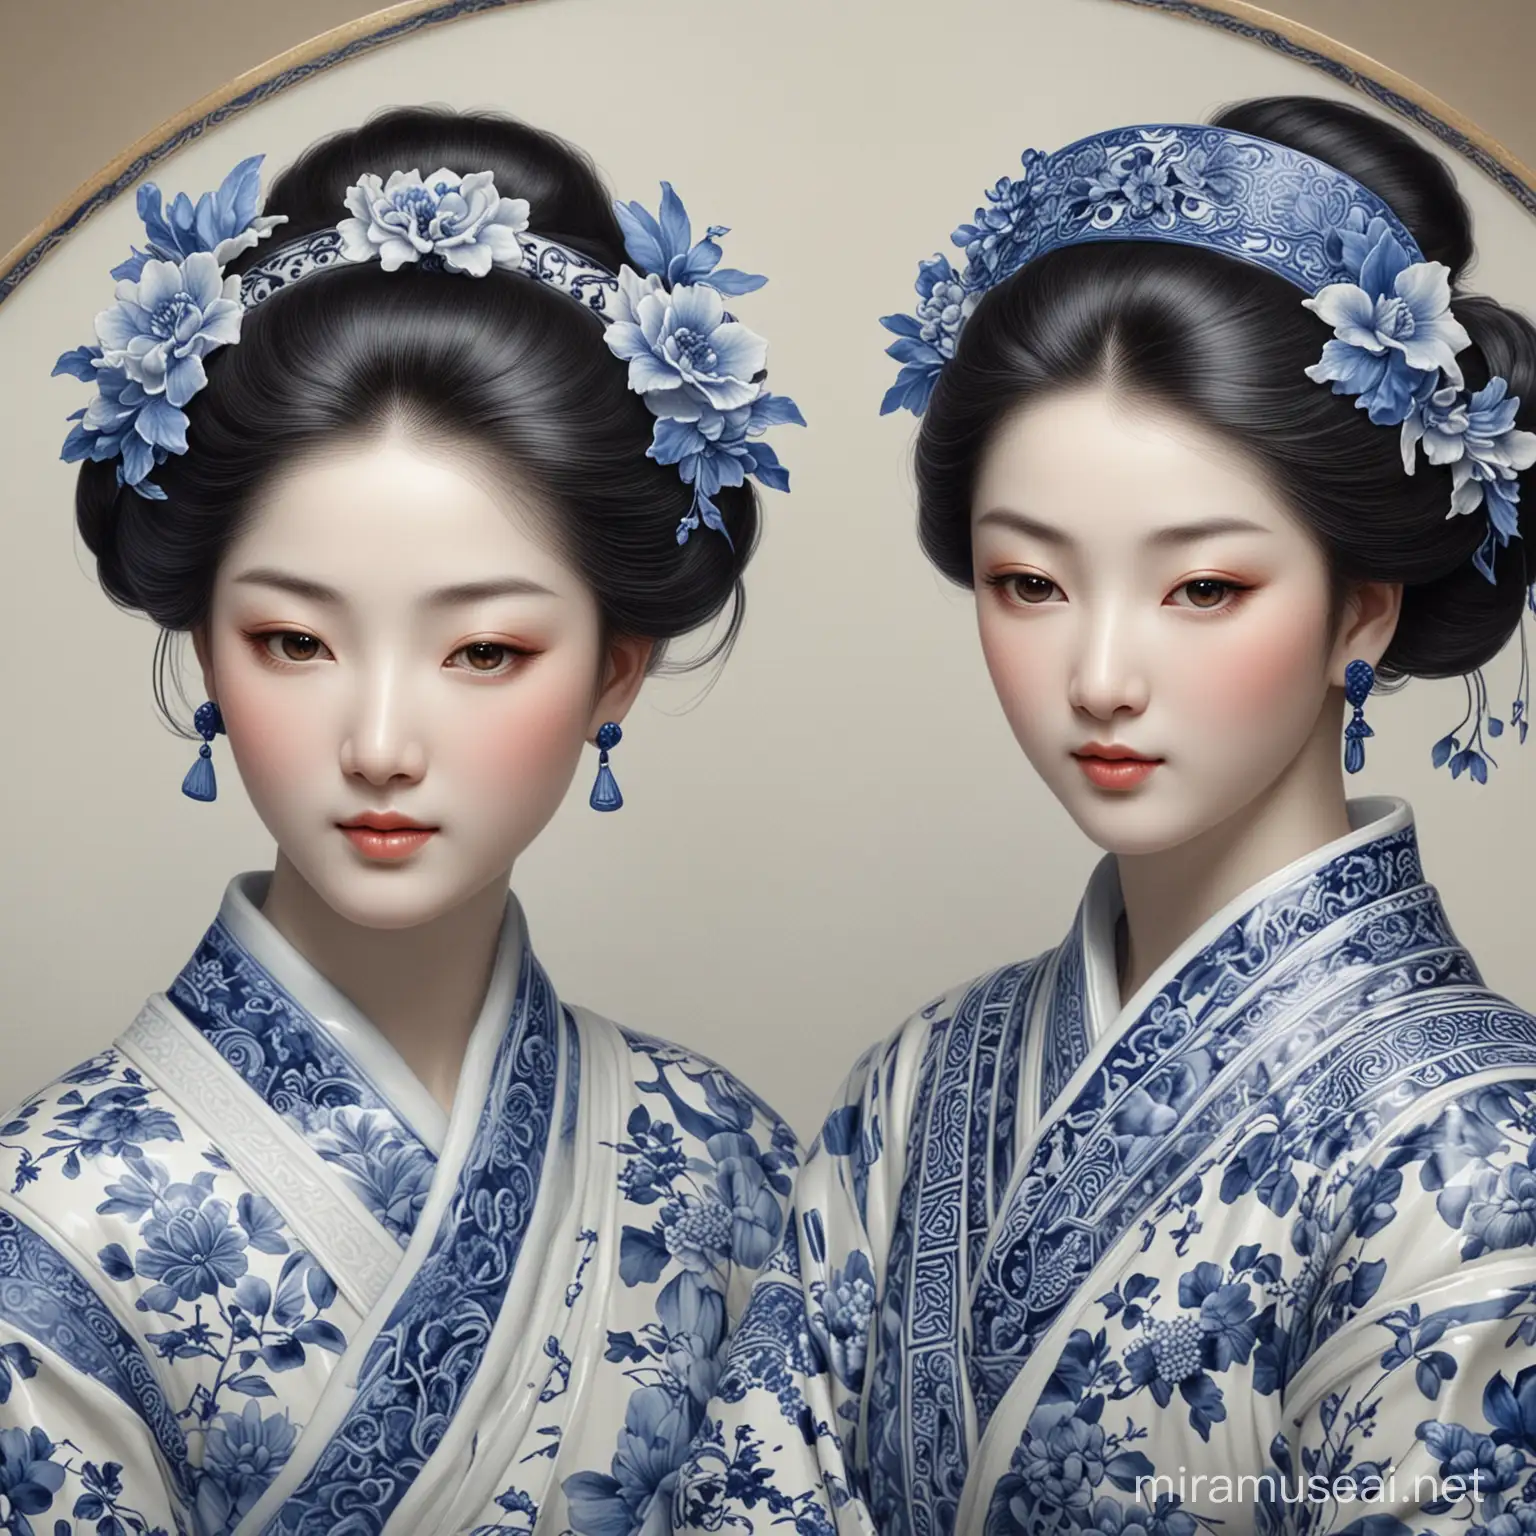 Ancient Oriental Beauties in Blue and White Porcelain Artwork